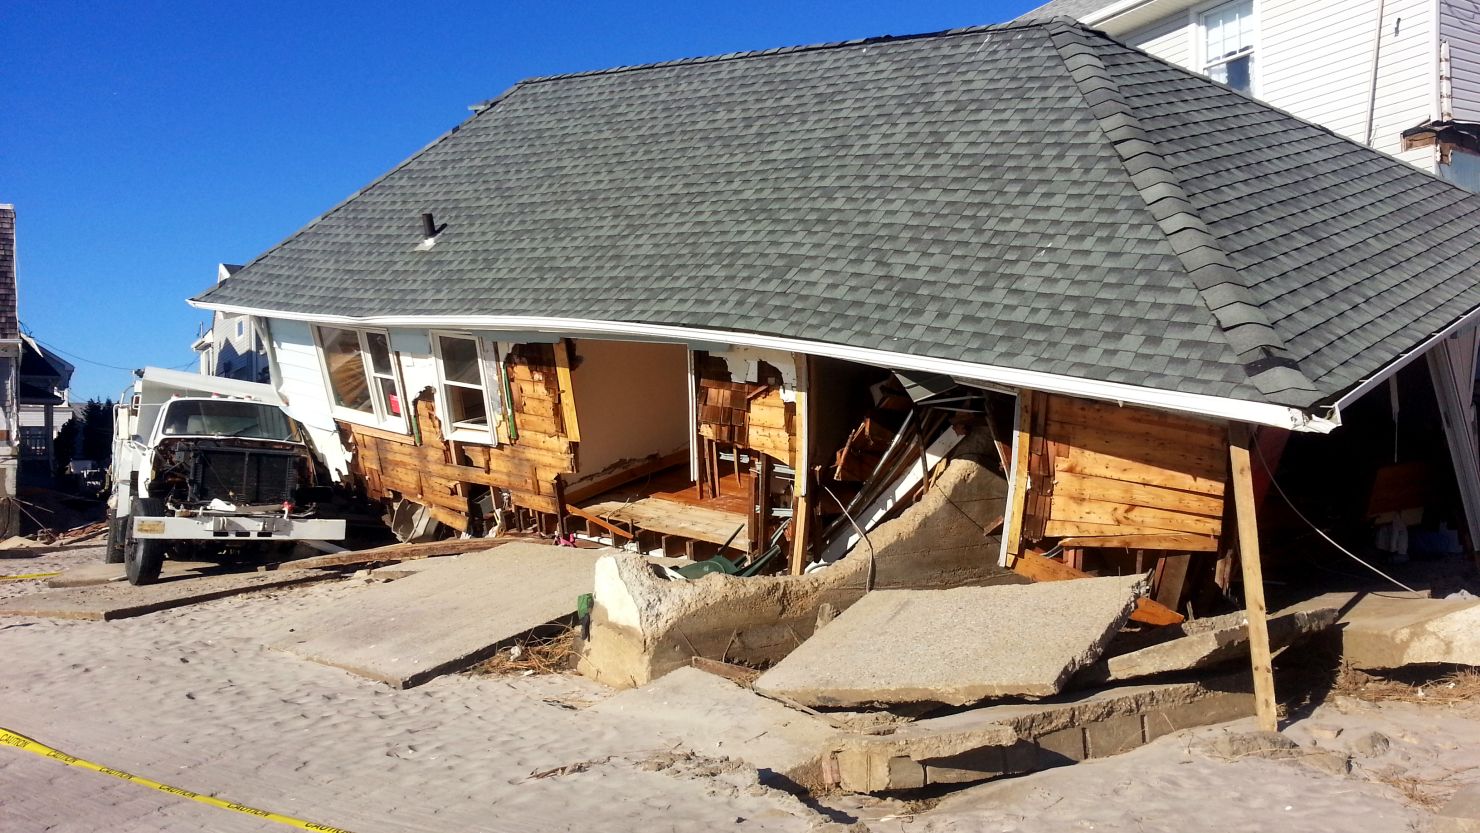 Kate Rigaut's home in Belle Harbor, New York after Superstorm Sandy barreled through the region.